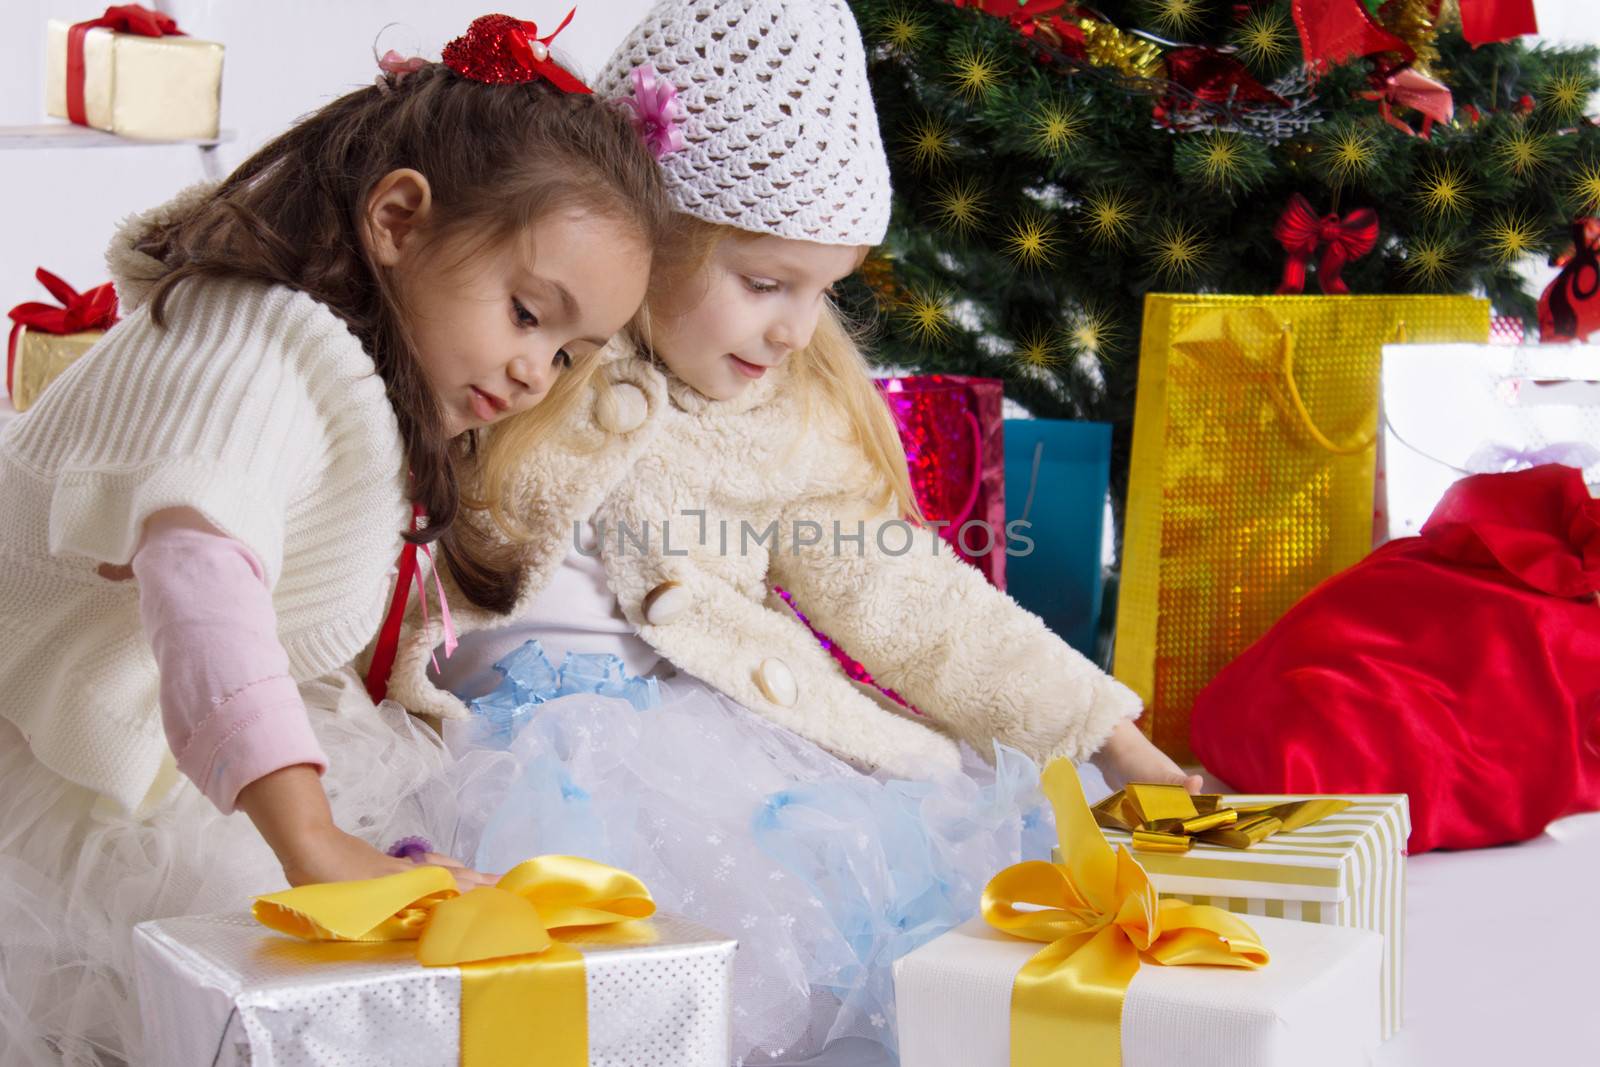 Lovely little girls with presents under Christmas tree by Angel_a